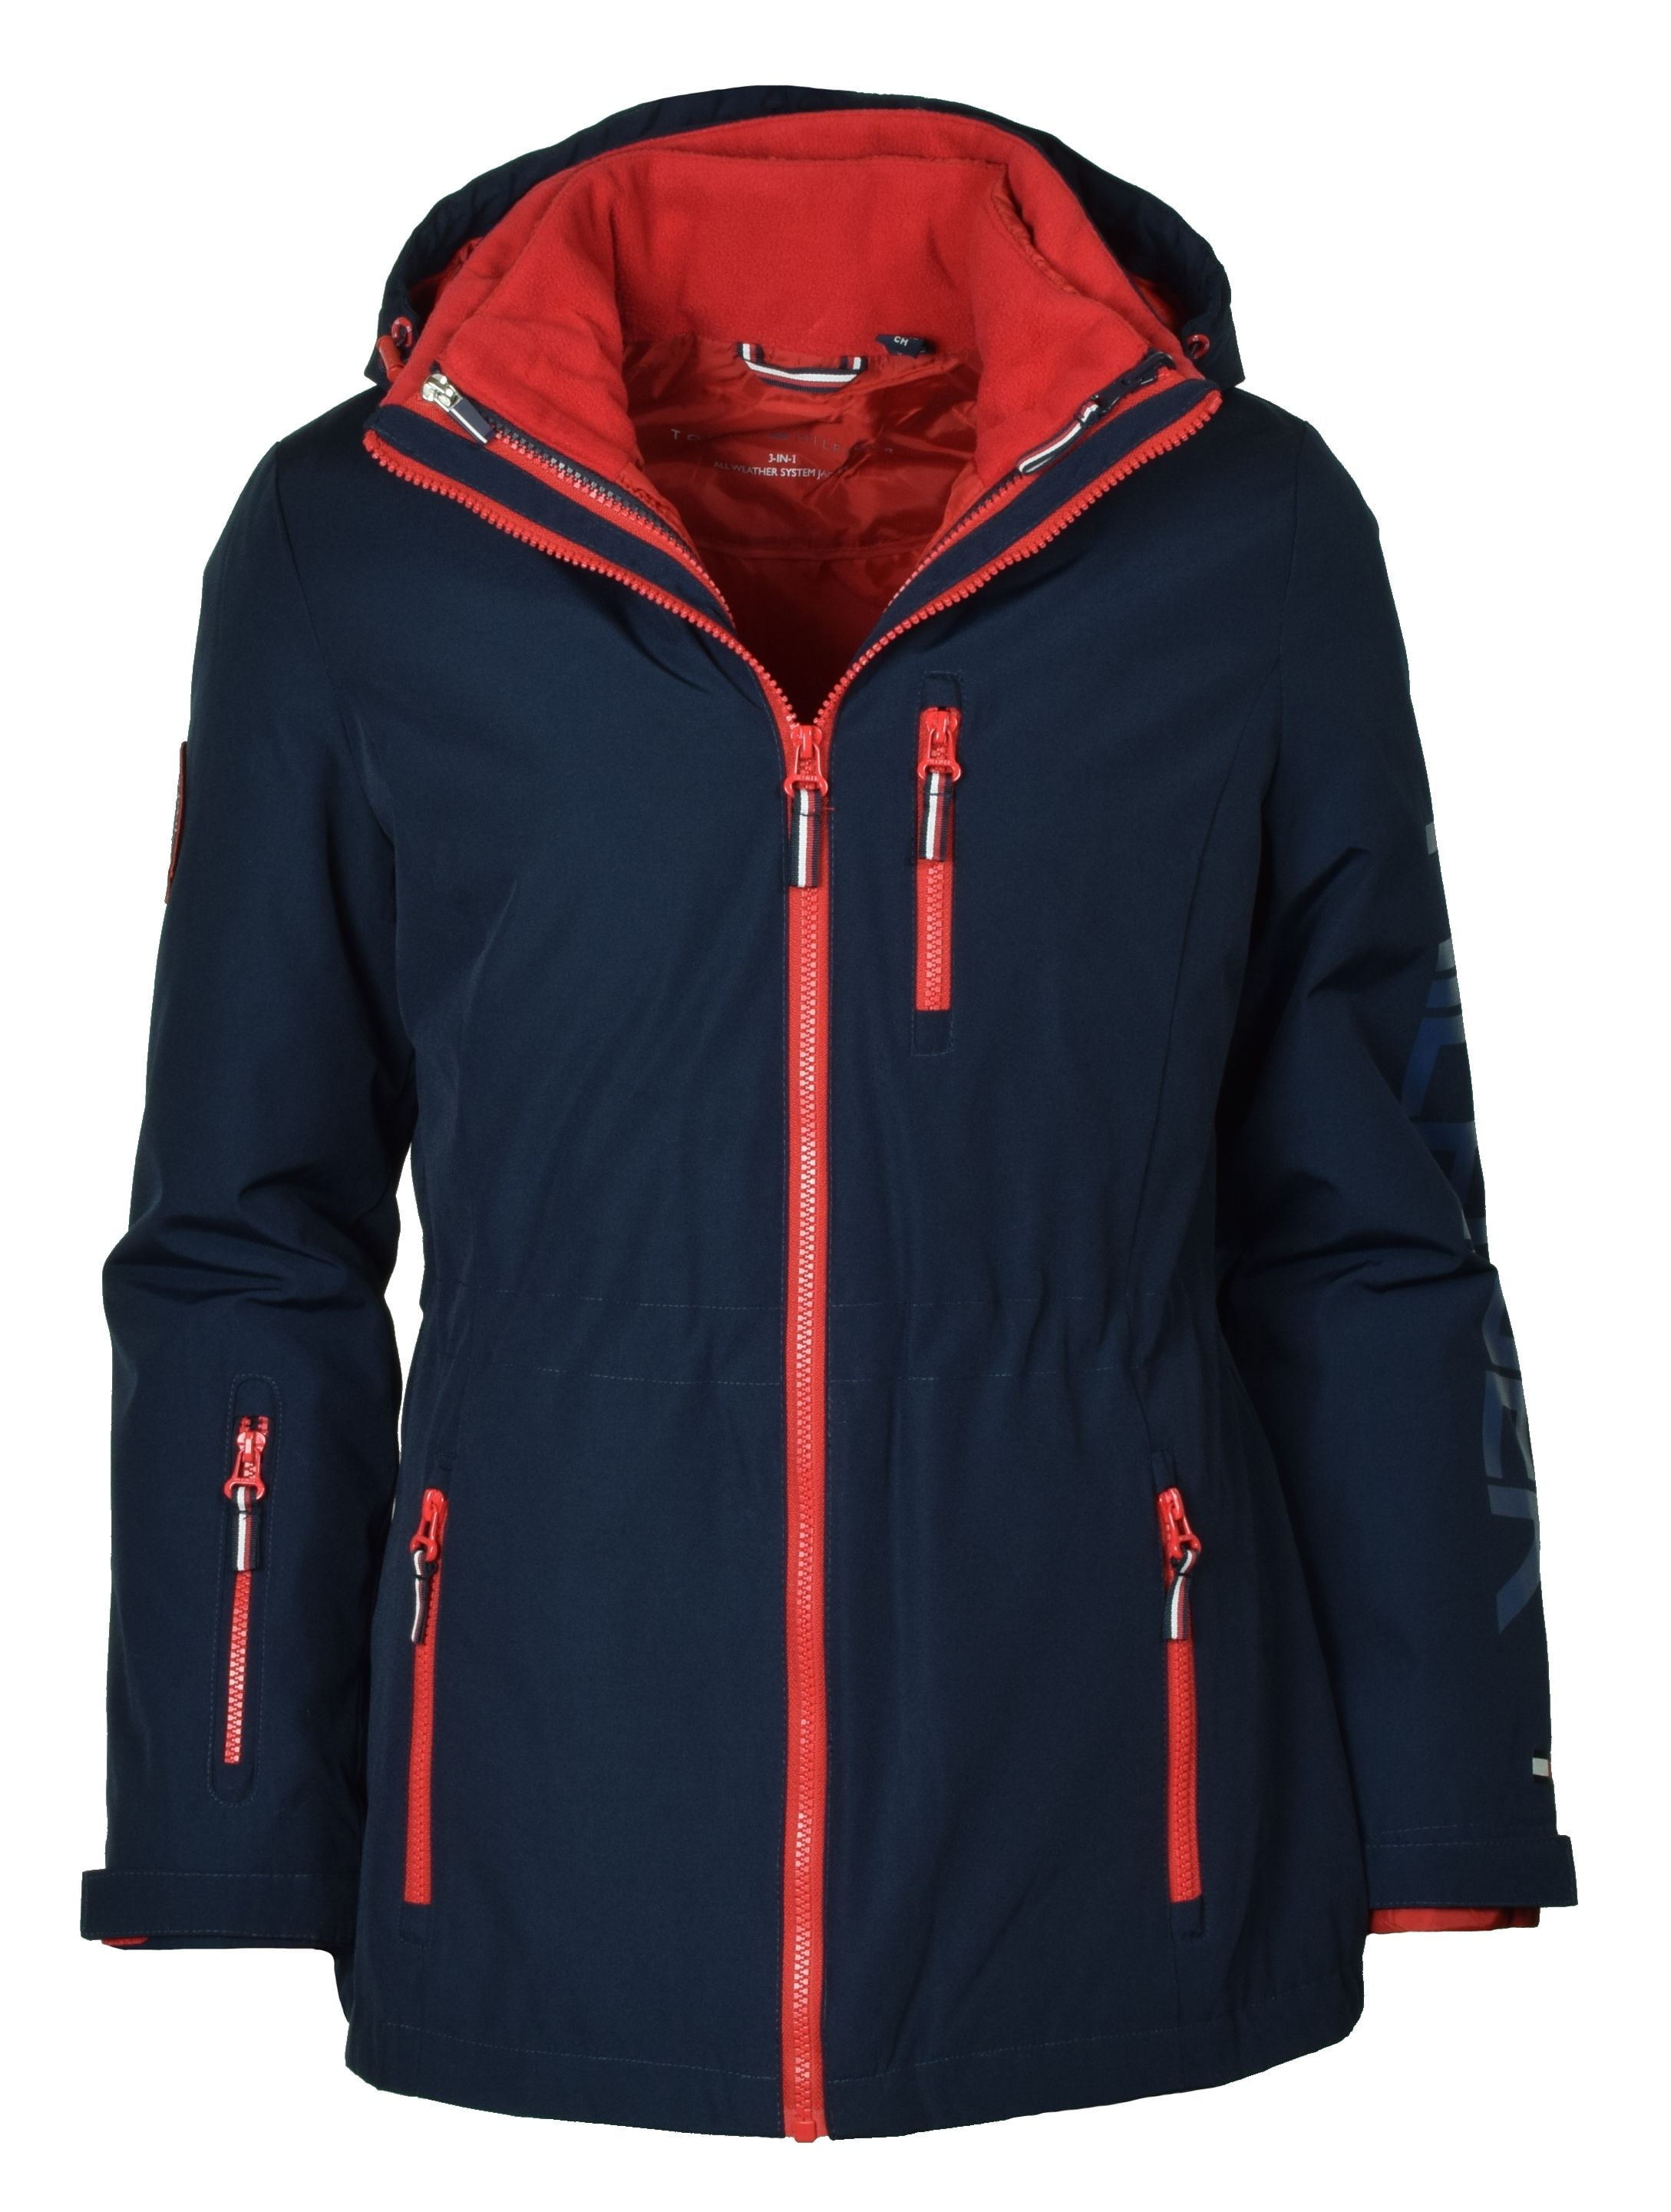 Tommy Hilfiger Womens 3-in-1 All Weather Systems Jacket